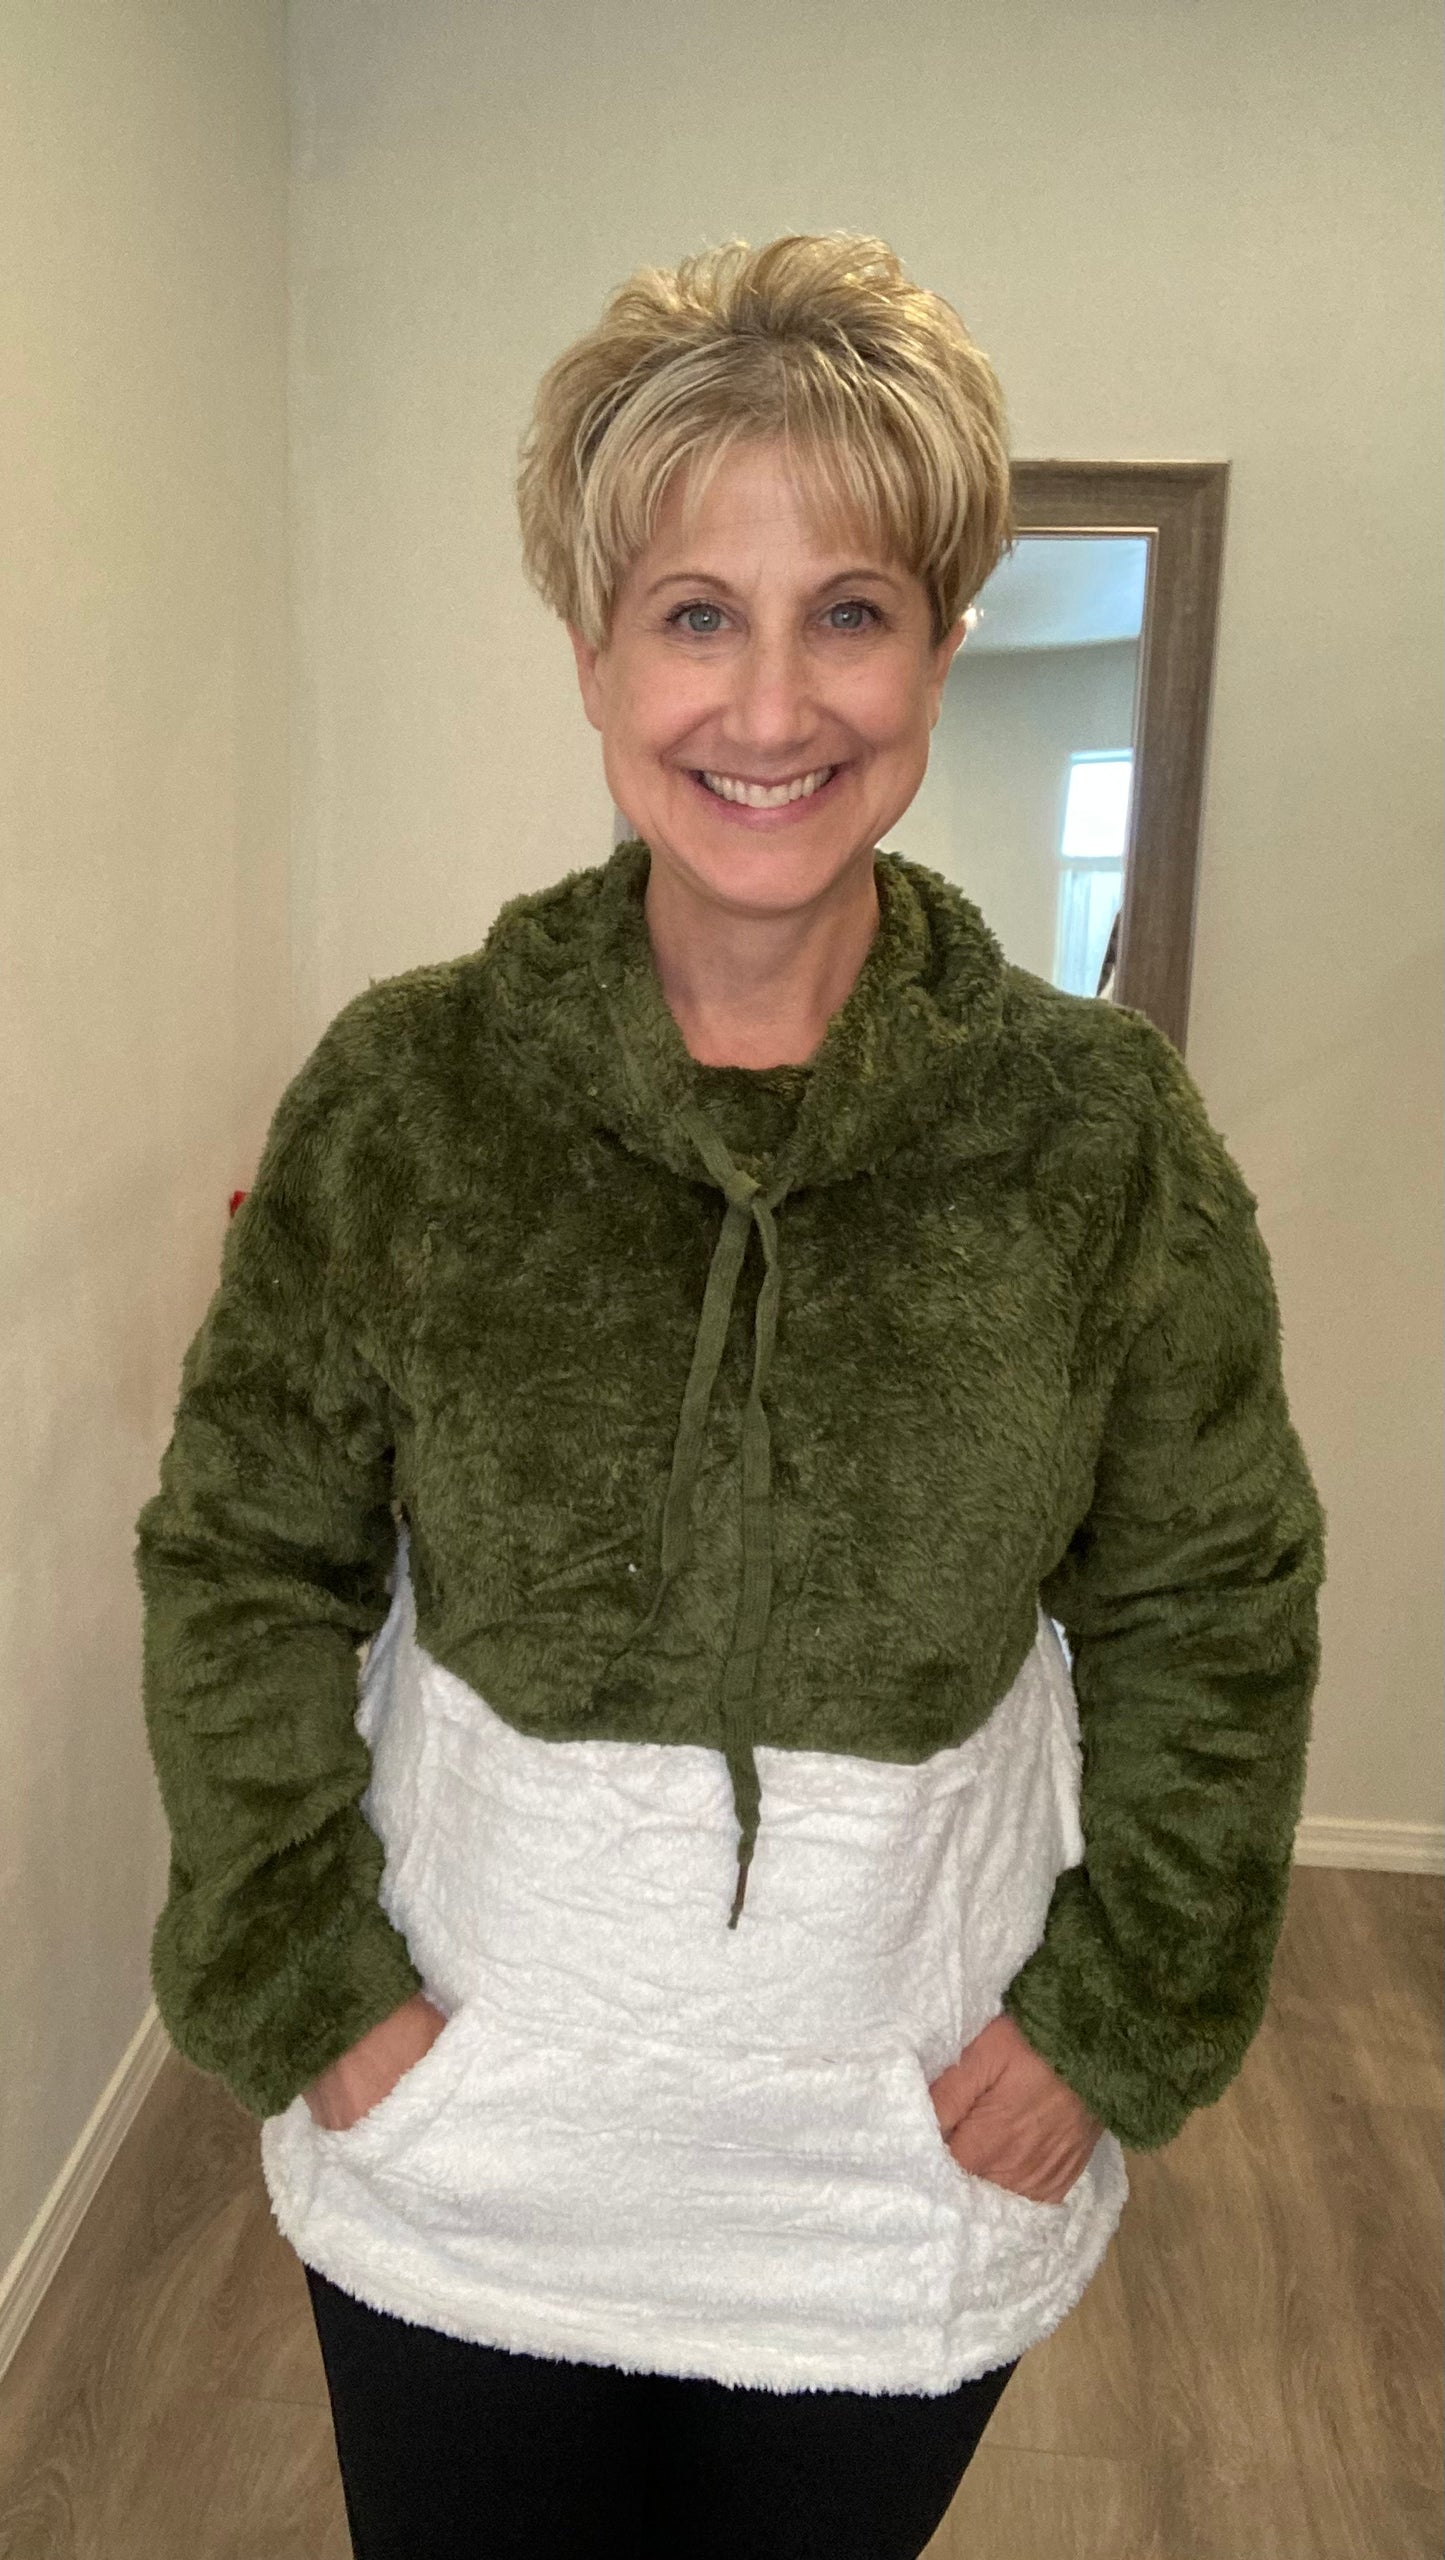 Fuzzy Fleece Pullover - Olive Green and Ivory Colorblock